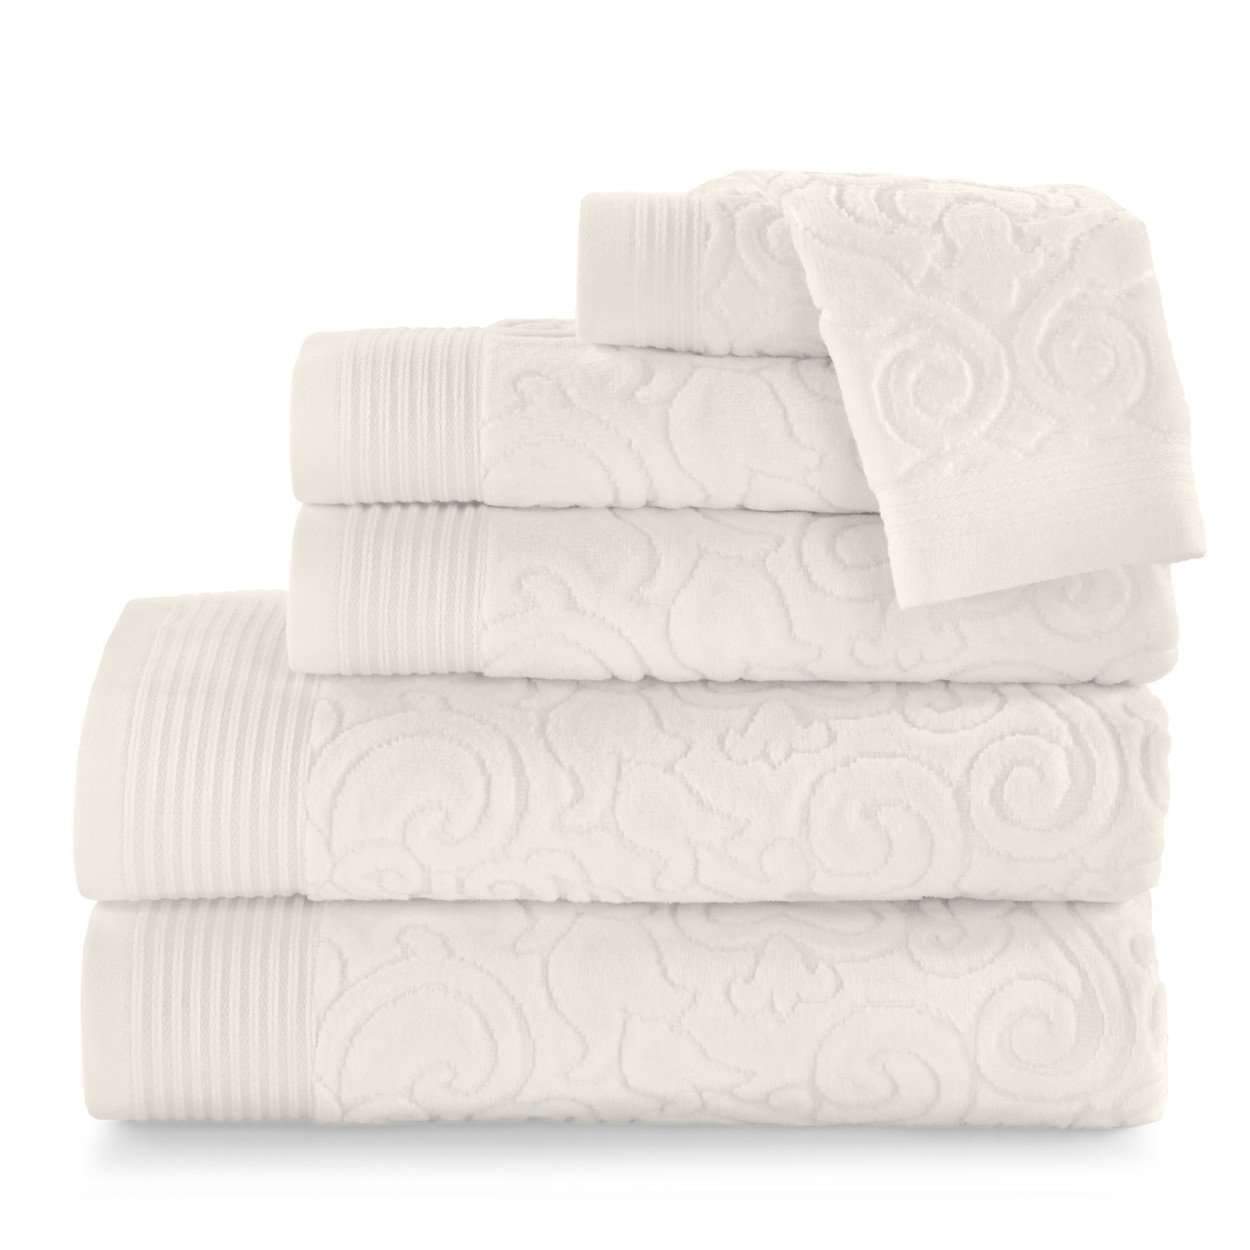 Peacock Alley Bamboo Hand Towel - White